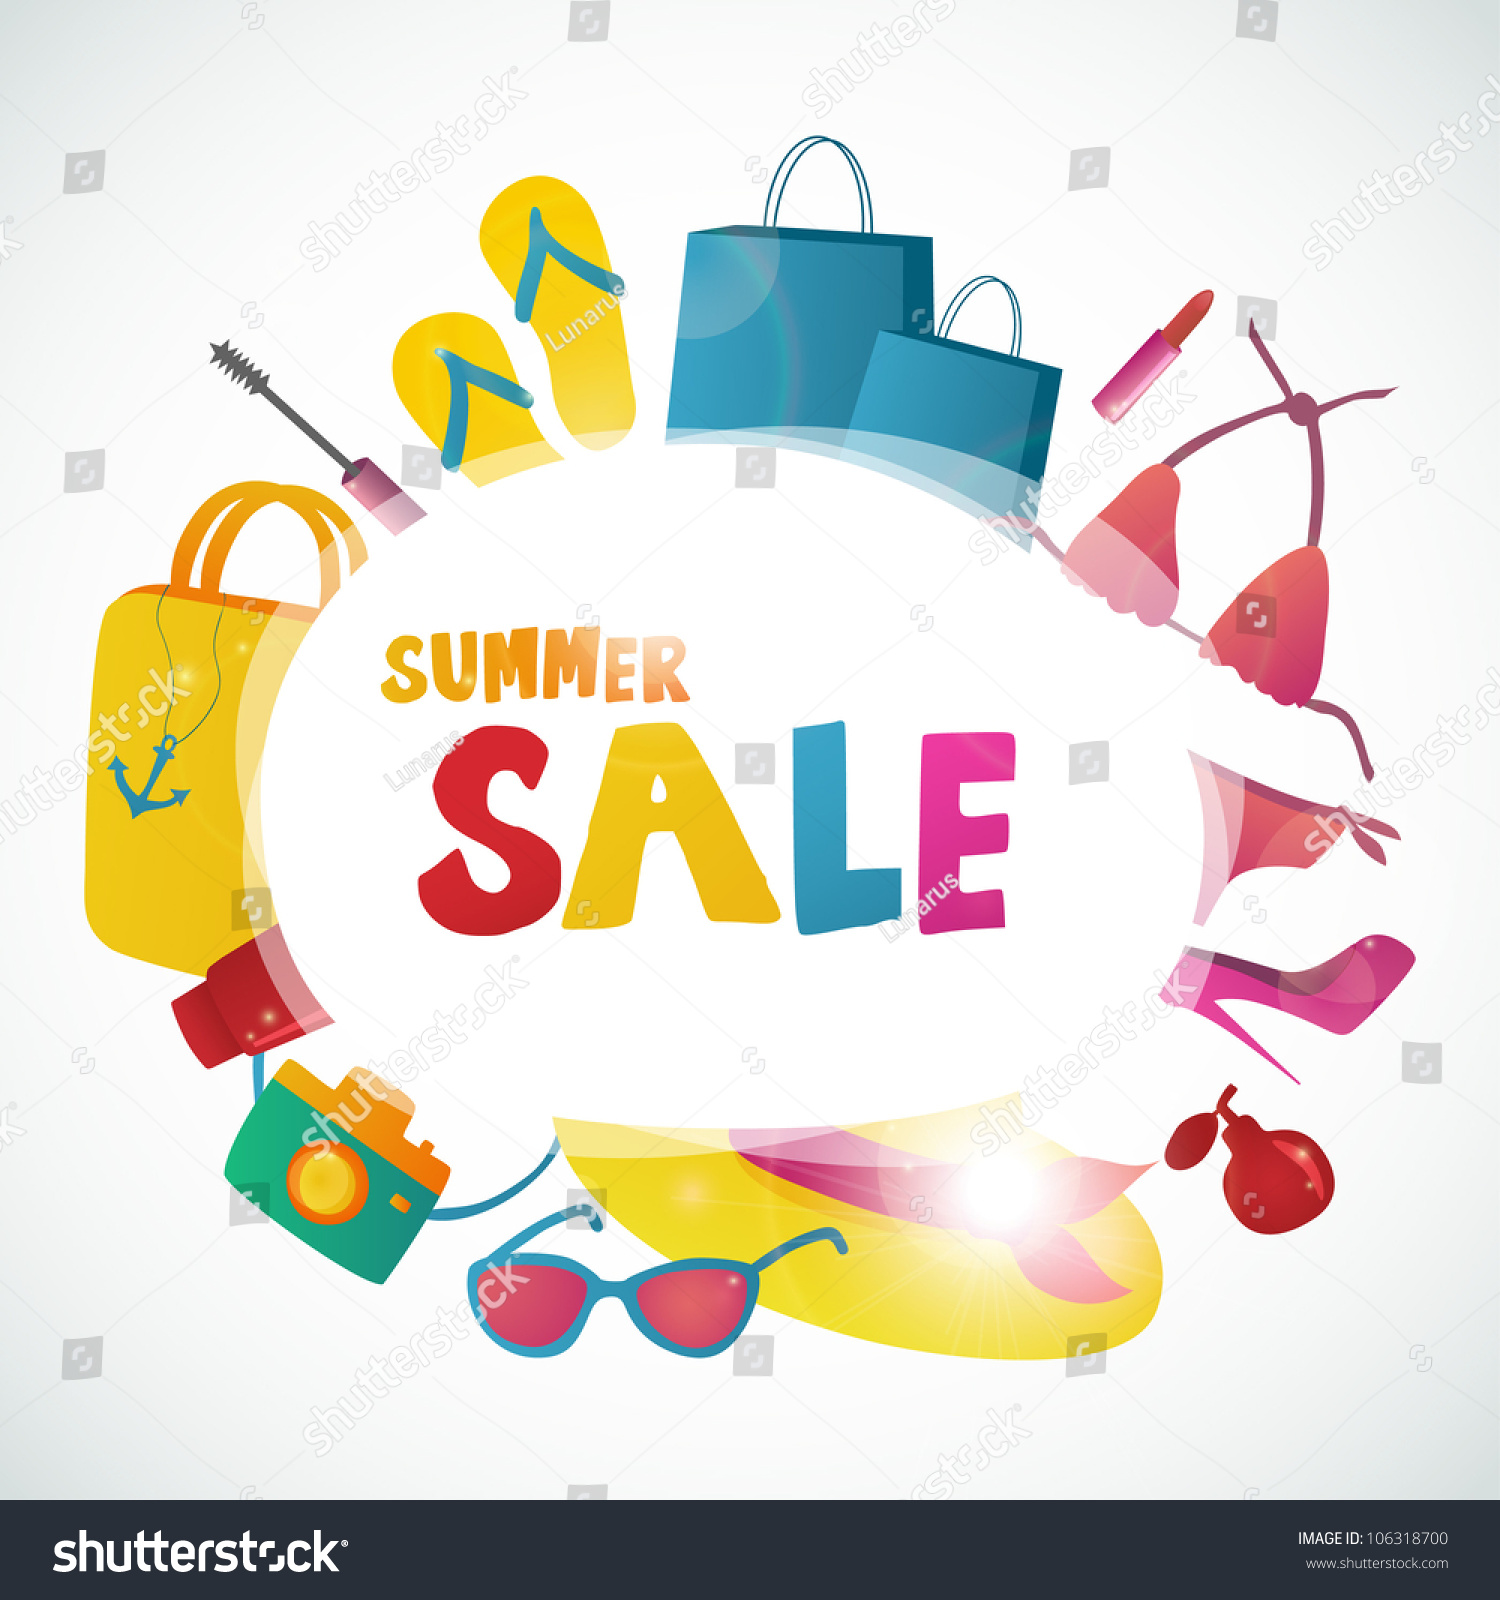 free clipart summer sale - photo #40